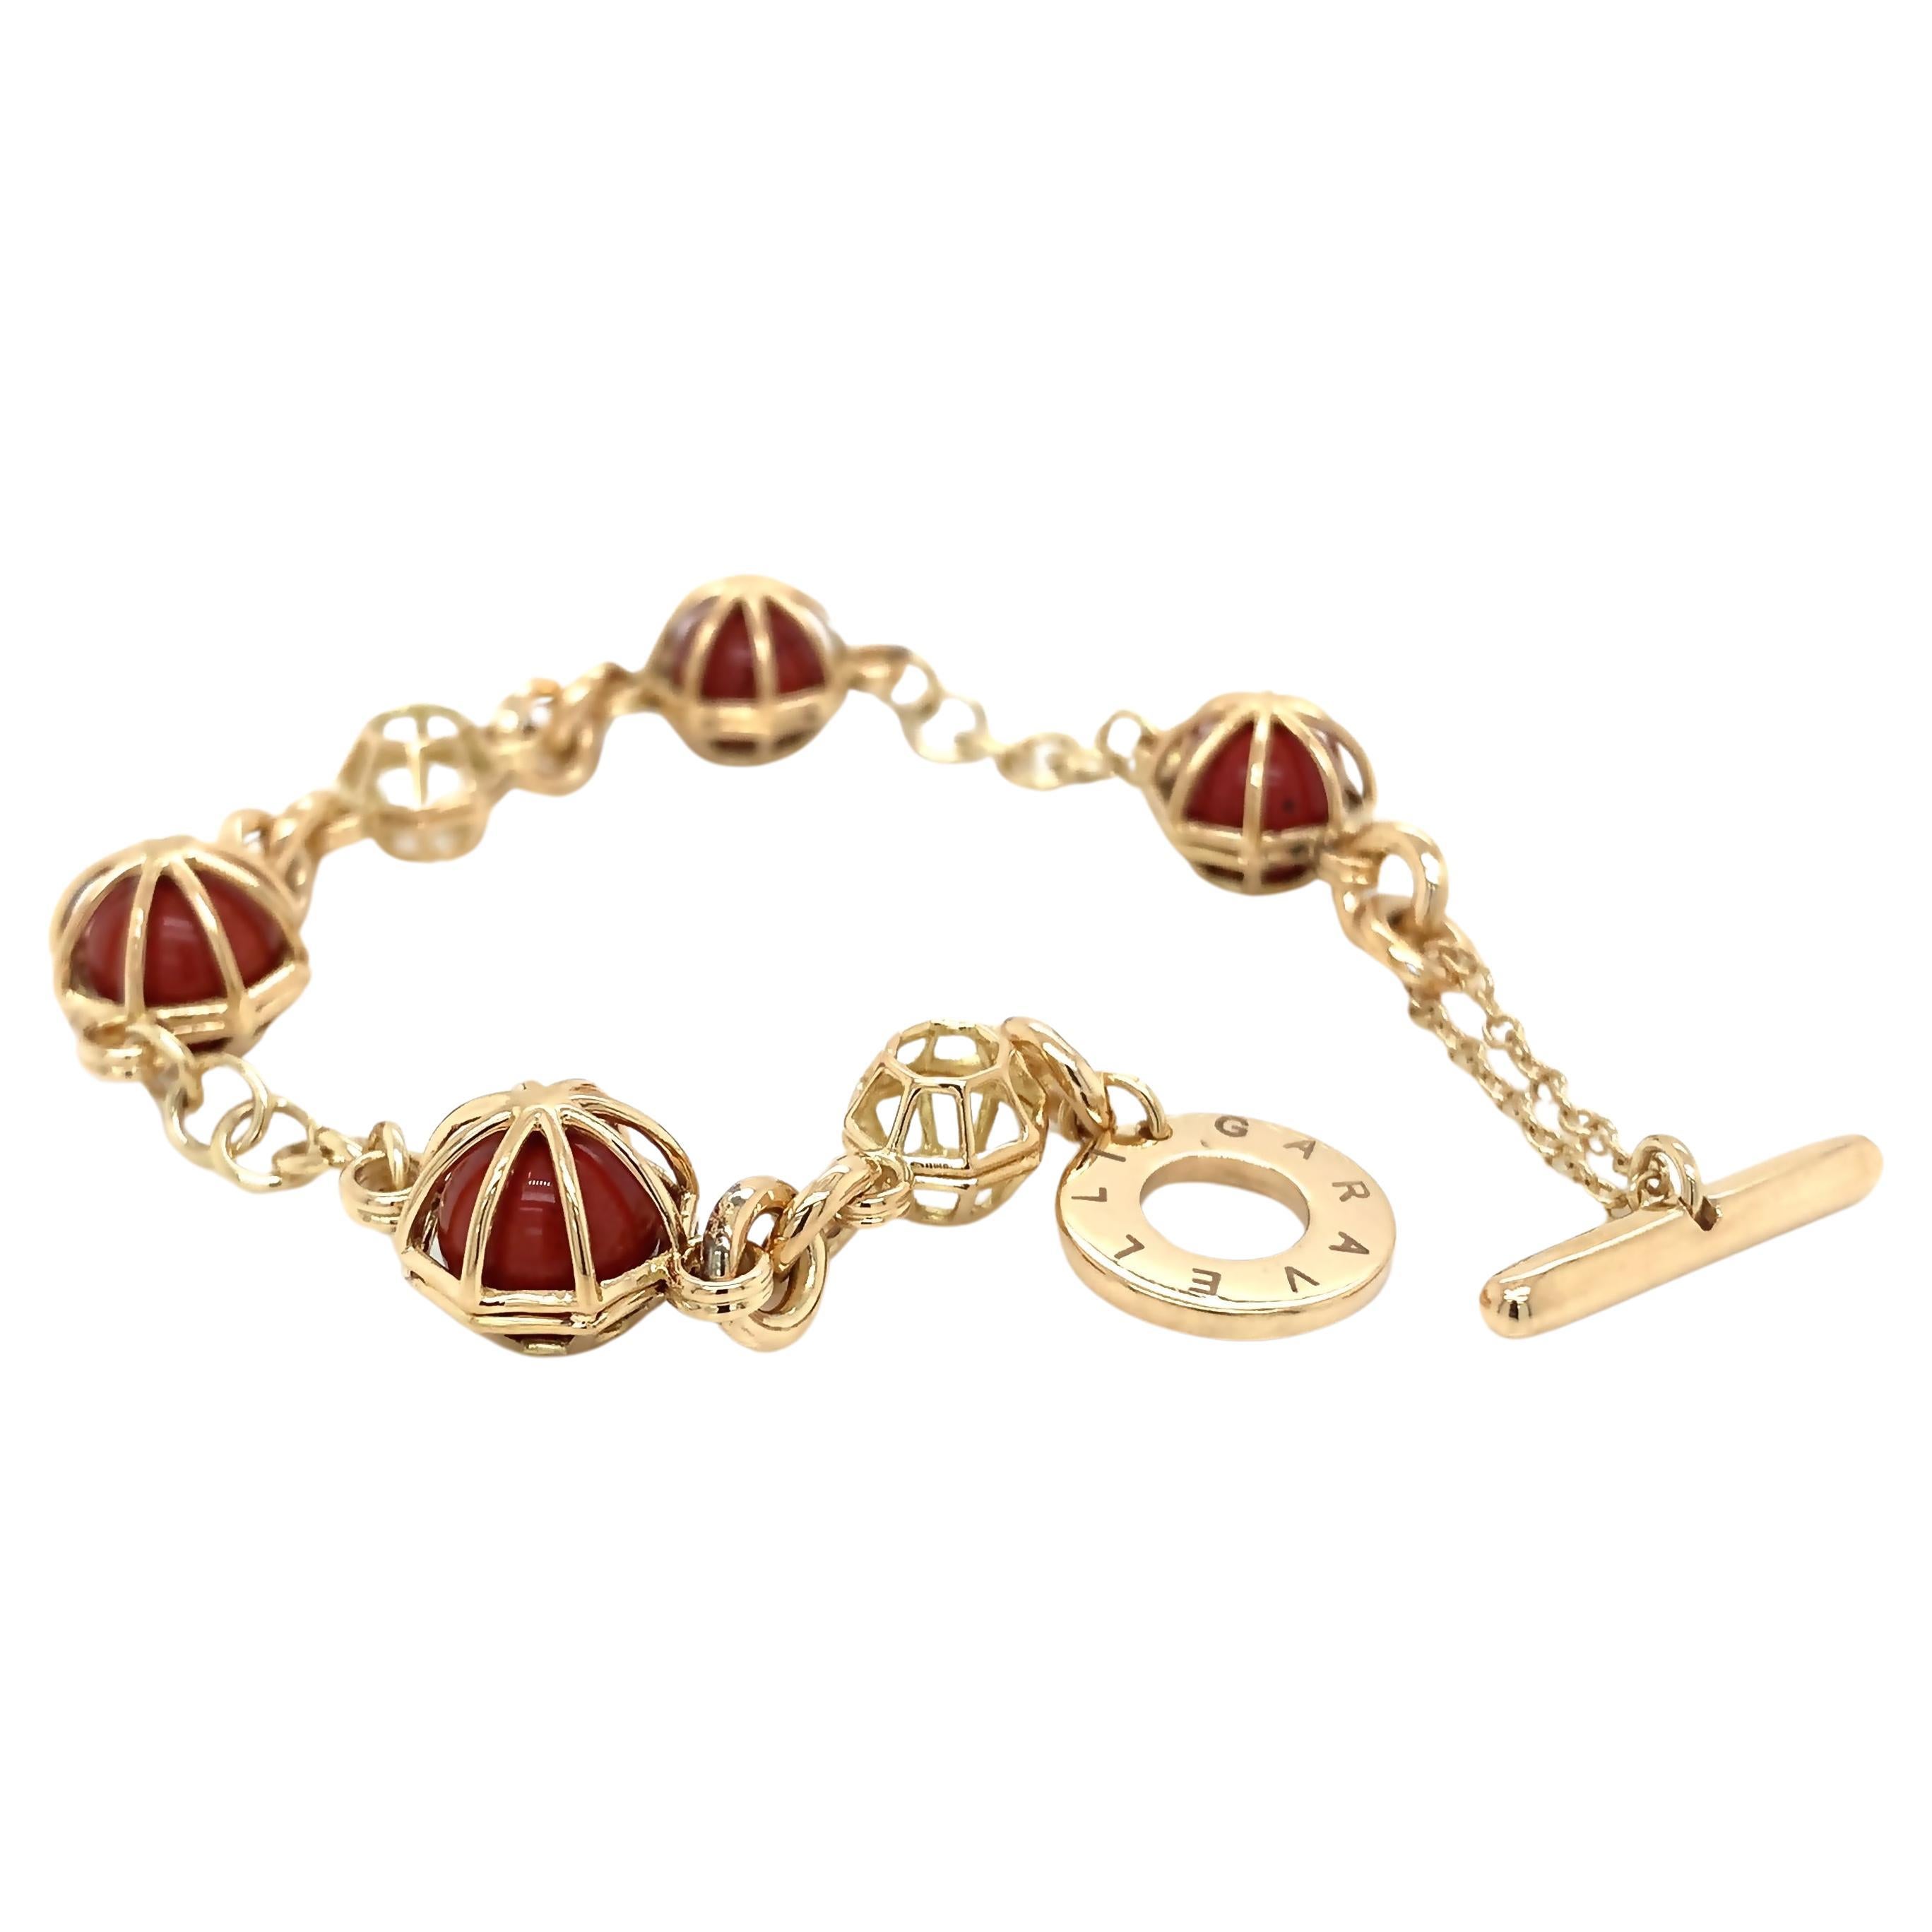 18KT Yellow Gold Chain Bracelet with JASPERS Spheres